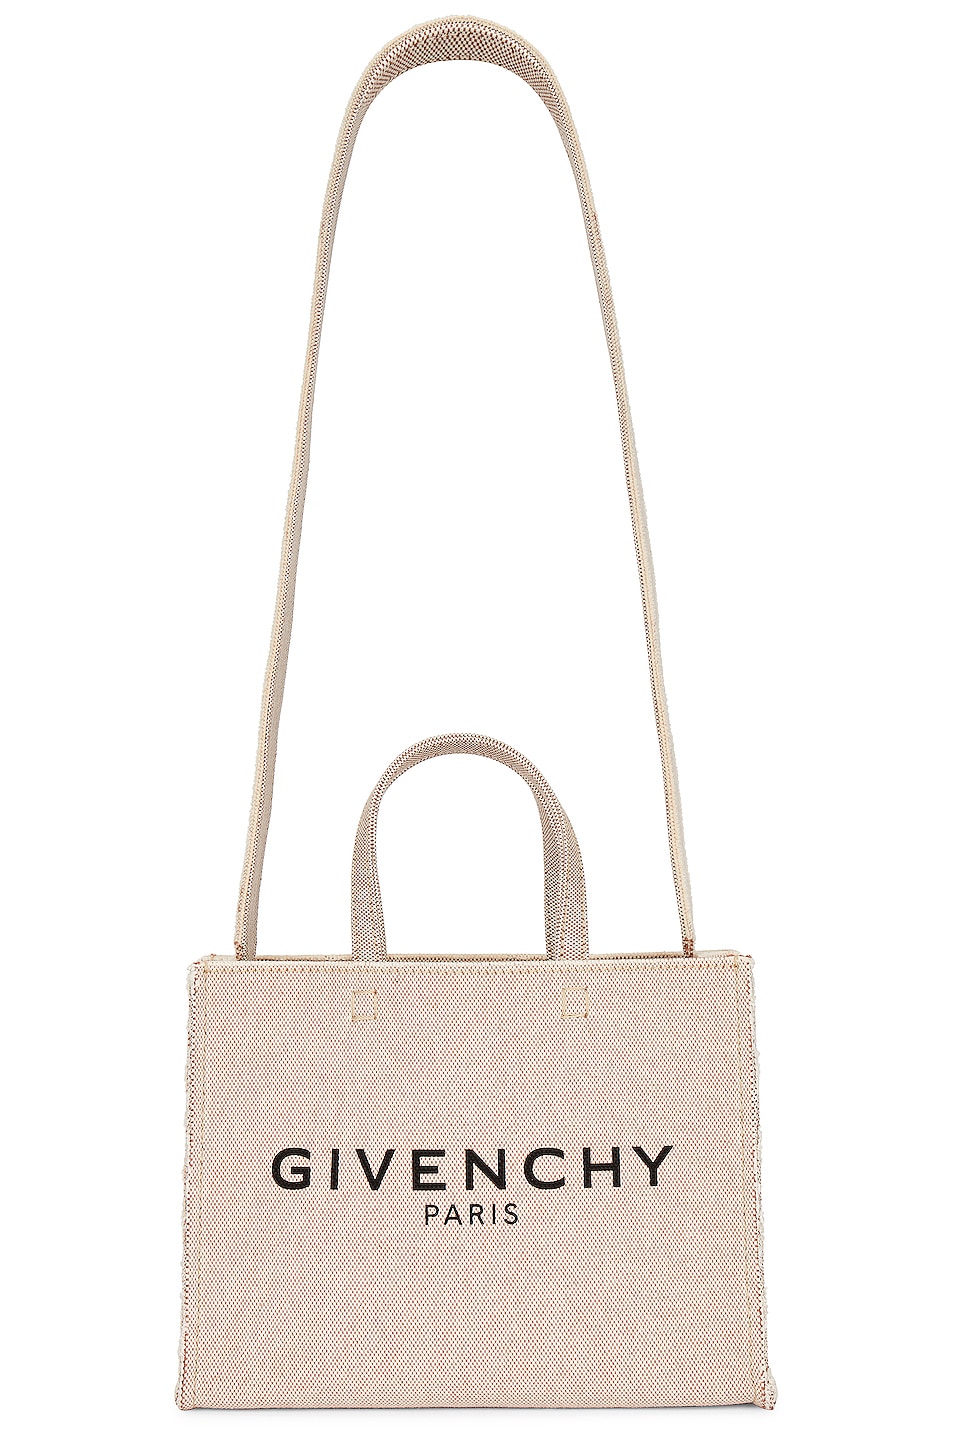 Givenchy Collection - Shoes, Dresses, Wallets and more at FWRD